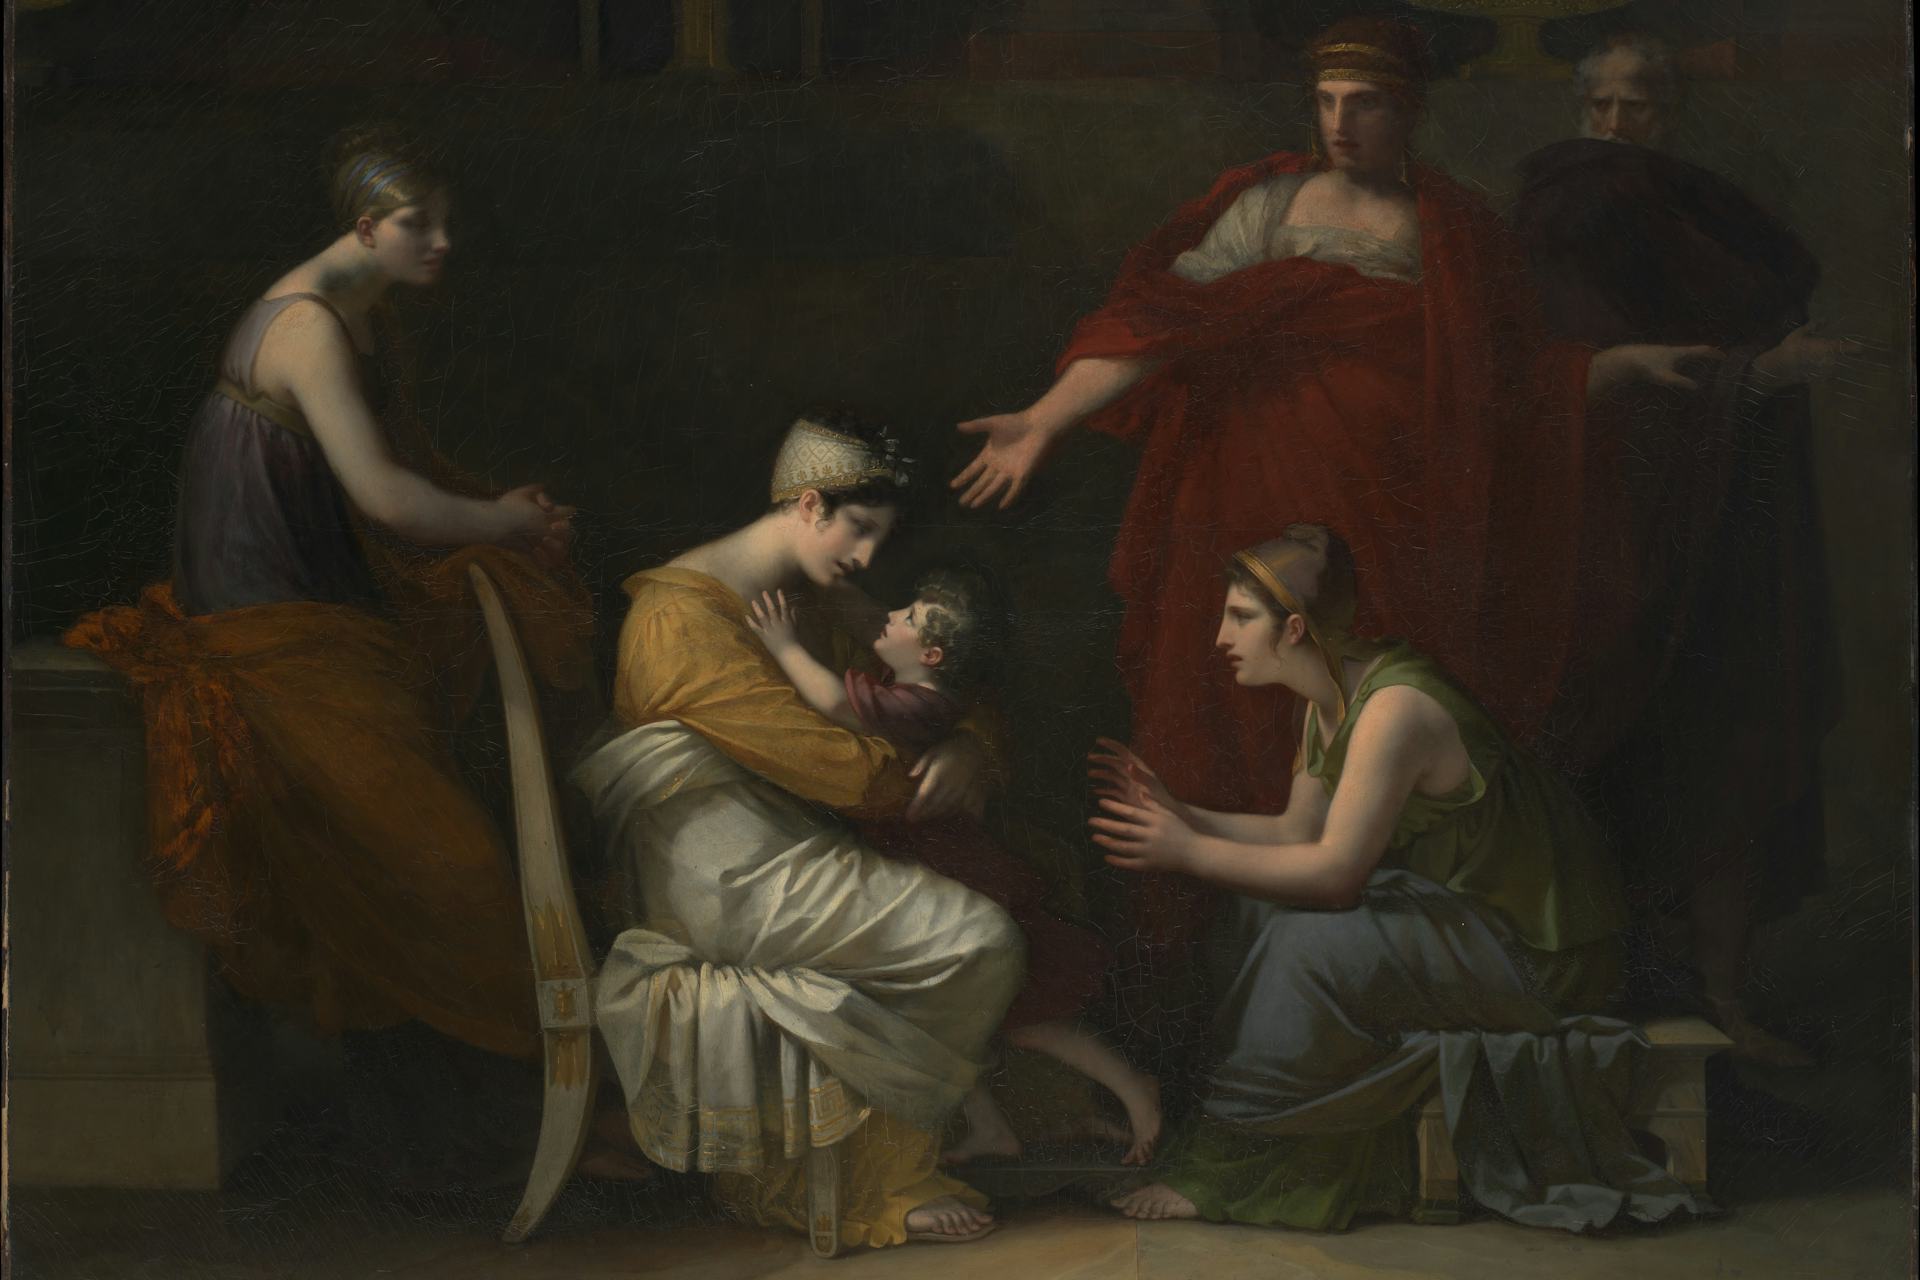 Andromache and Astyanax by Pierre Paul Prud'hon (nineteenth century)